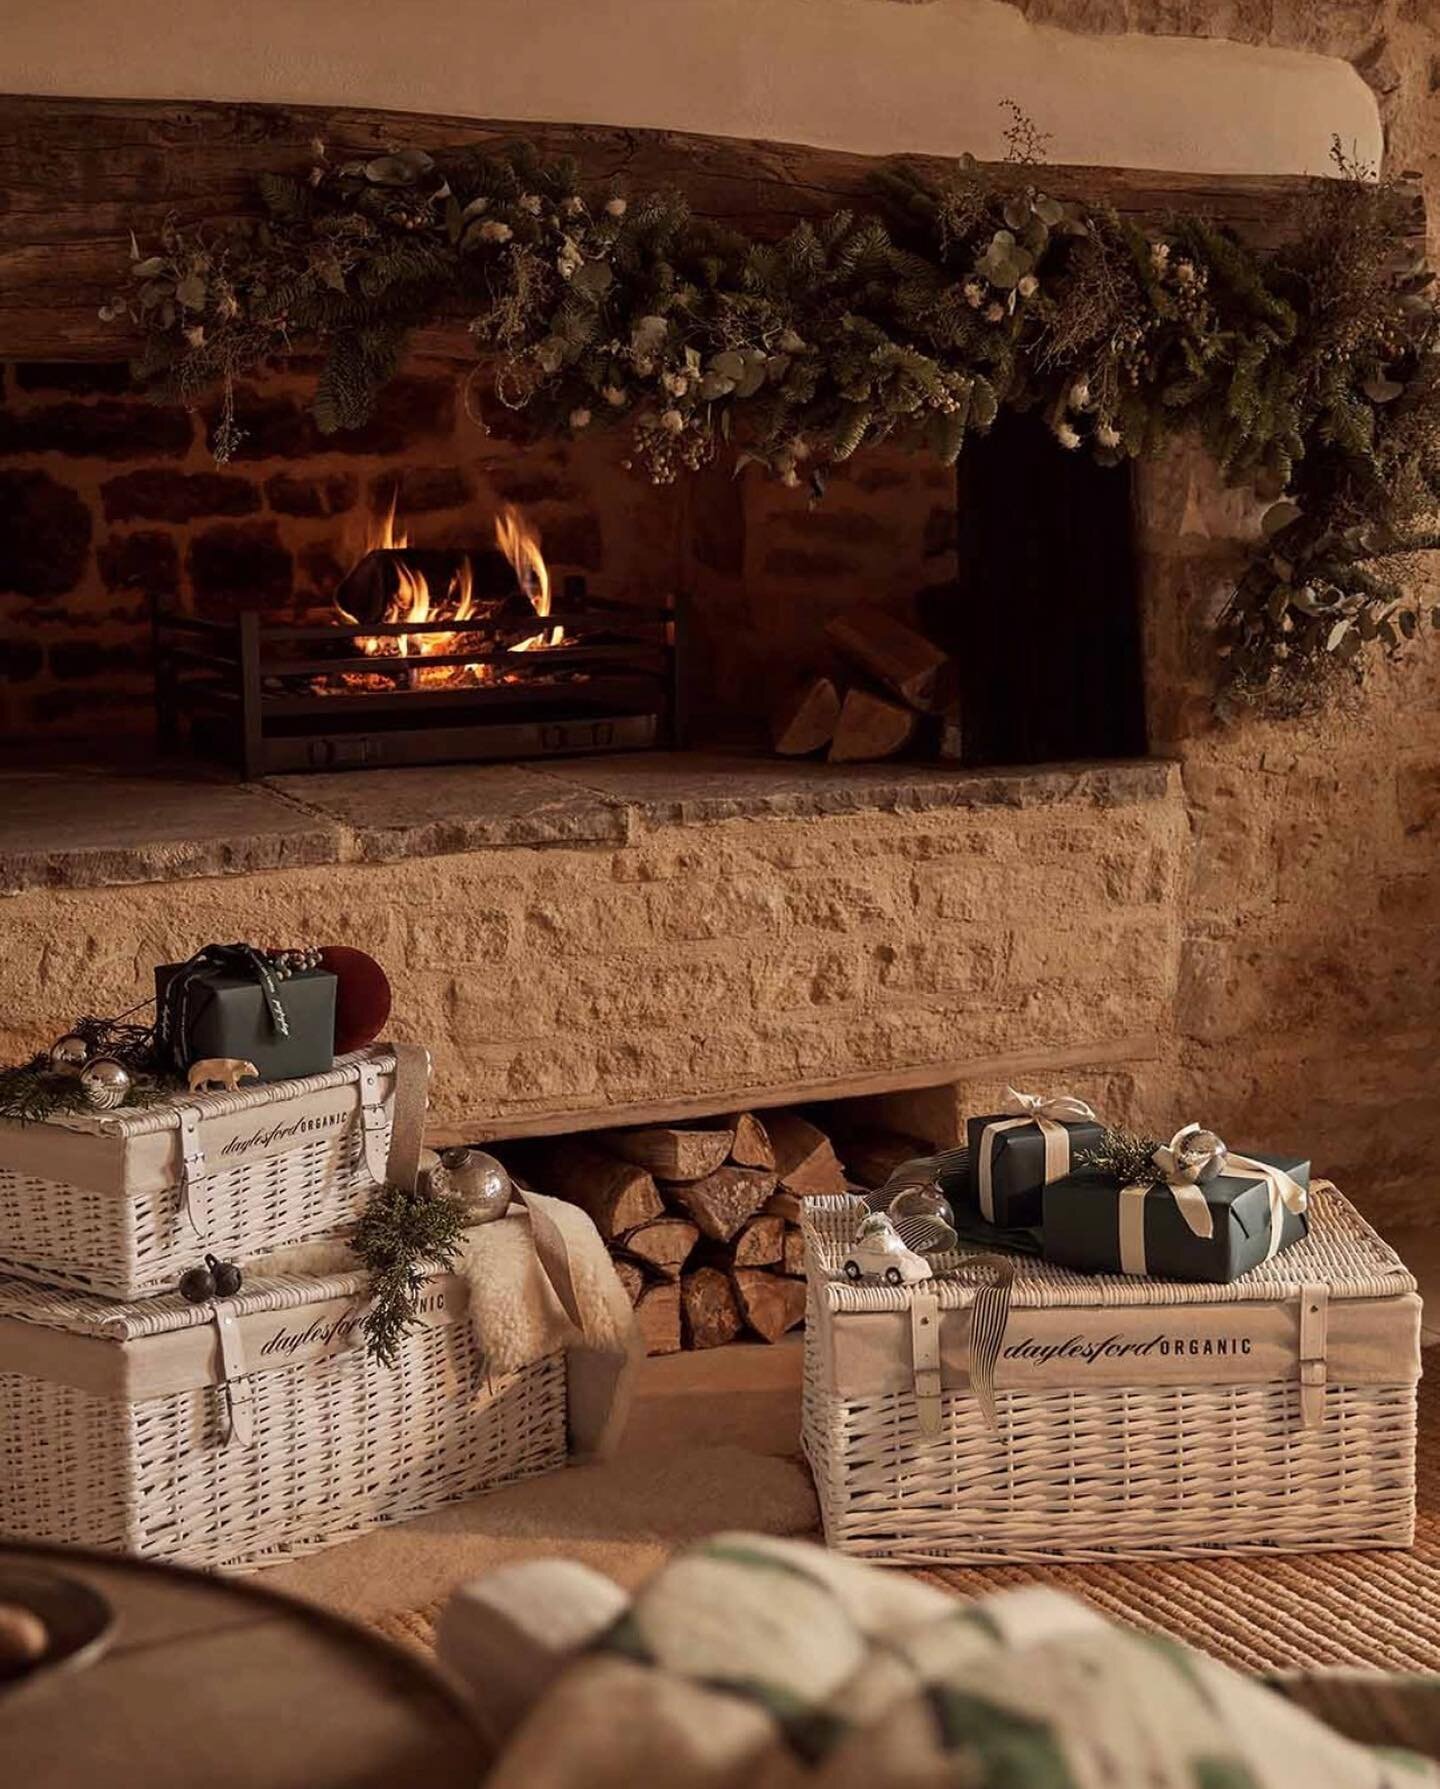 Who is lucky enough to be getting a treat from Daylesford this Christmas?  Just a stones throw from our cottage; The Dovecote. Enjoy! 🤍

@daylesfordfarm 

#englishvillage #englishvillages #cotswolds #thecotswolds #interiorshop #cotswoldslife #cotswo